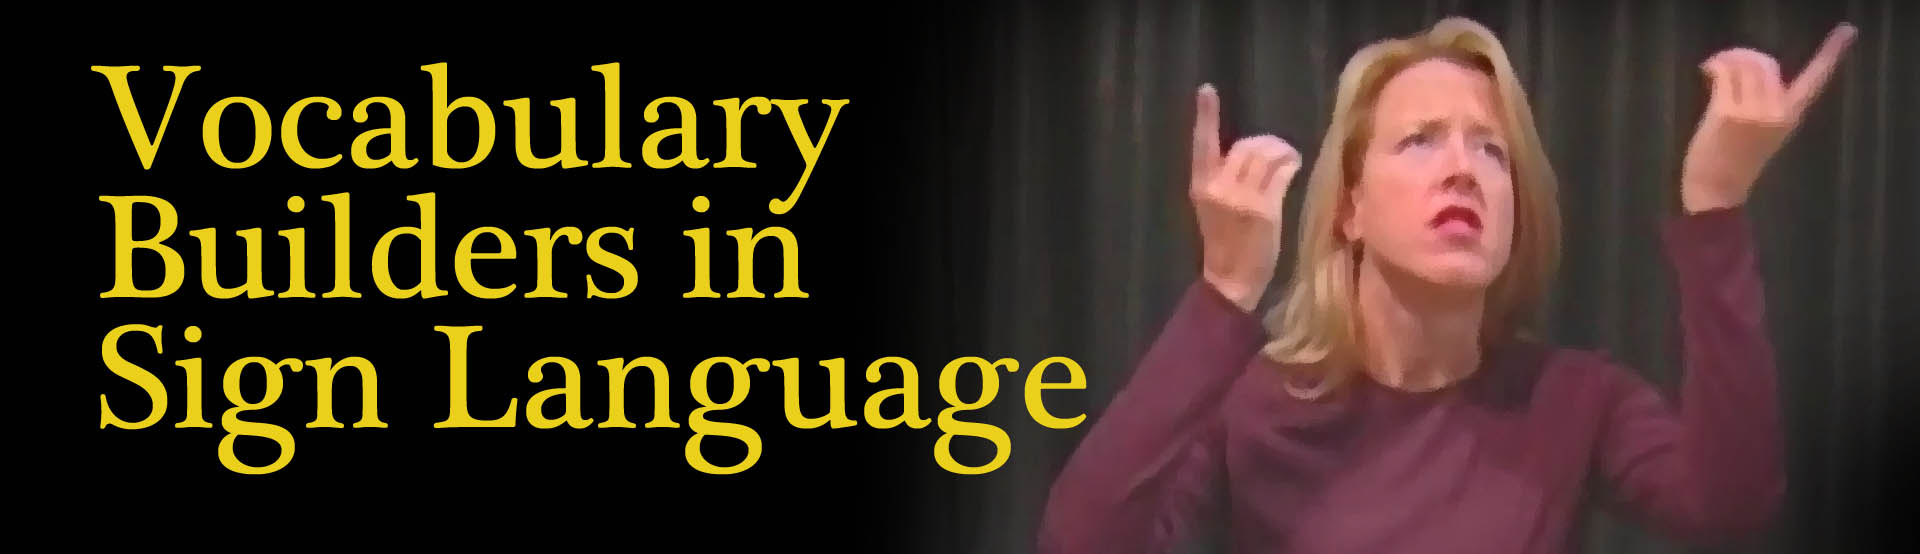 Vocabulary Builders In Sign Language